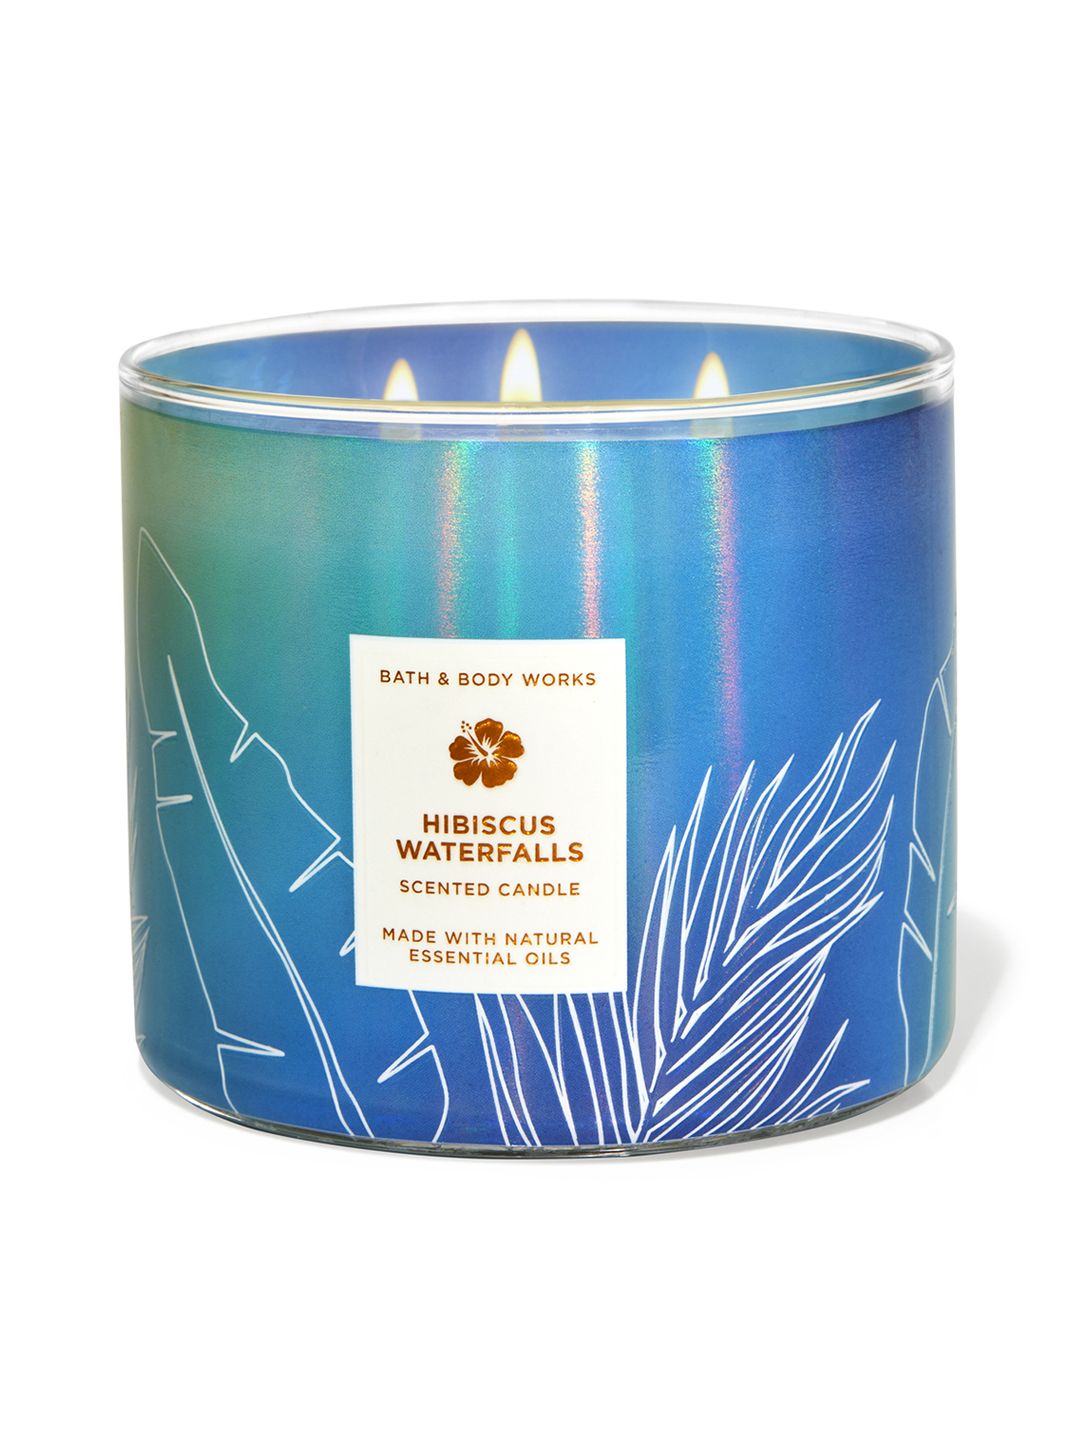 Bath & Body Works Hibiscus Waterfalls 3-Wick Scented Candle - 411 g Price in India